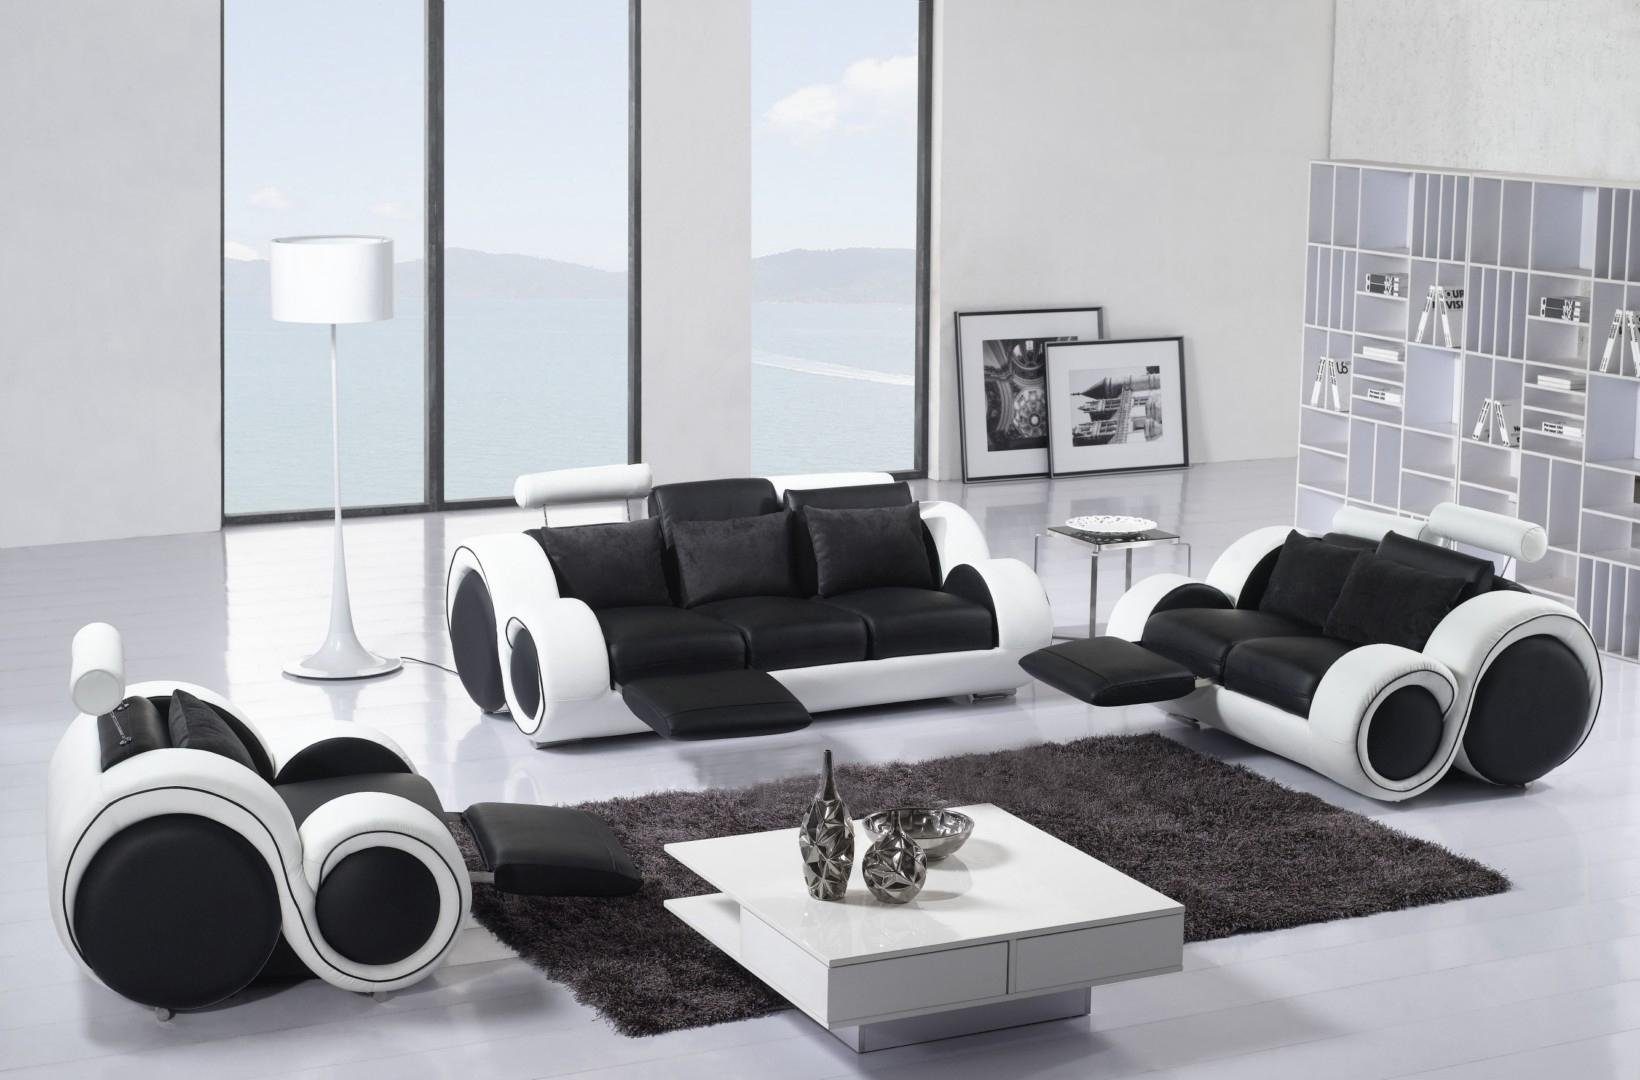 JVmoebel Sofa Europe Couch, Sitzer Sofa Made Sofagarnitur in 3+2+1 Relax Moderne Funktion